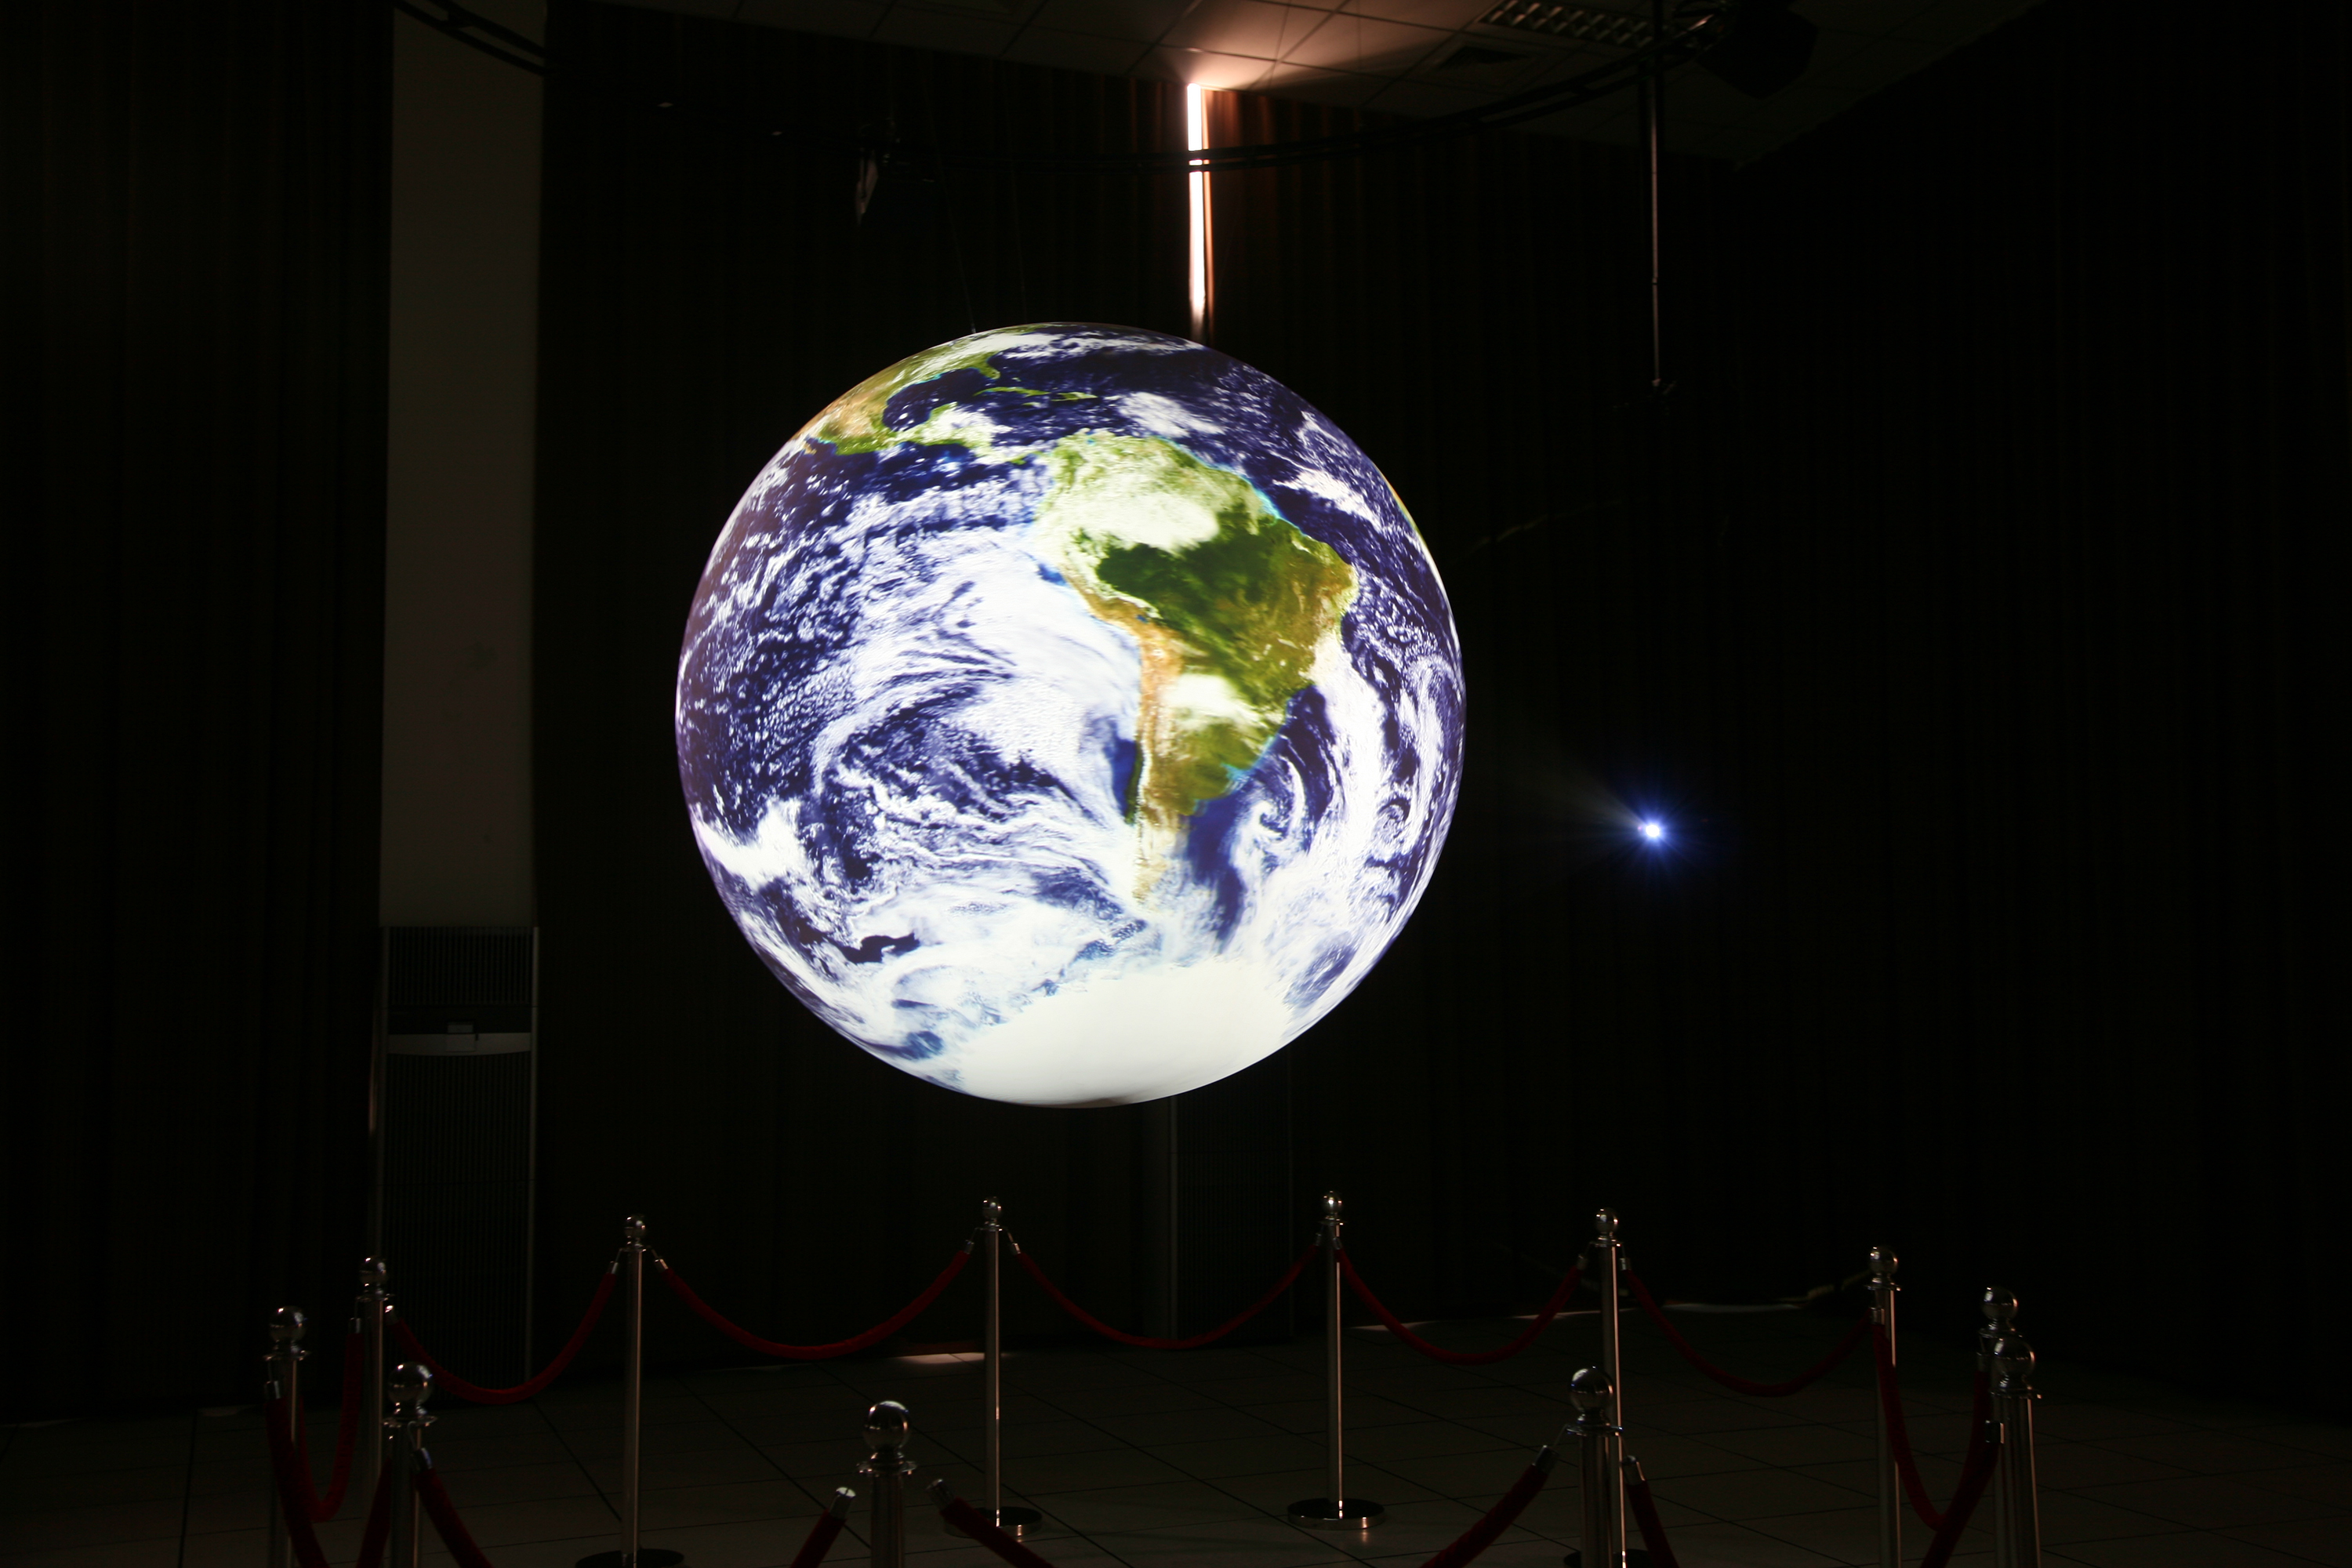 Science On a Sphere displays satellite imagery of Earth in an empty room, cordoned off from visitors by a red velvet rope